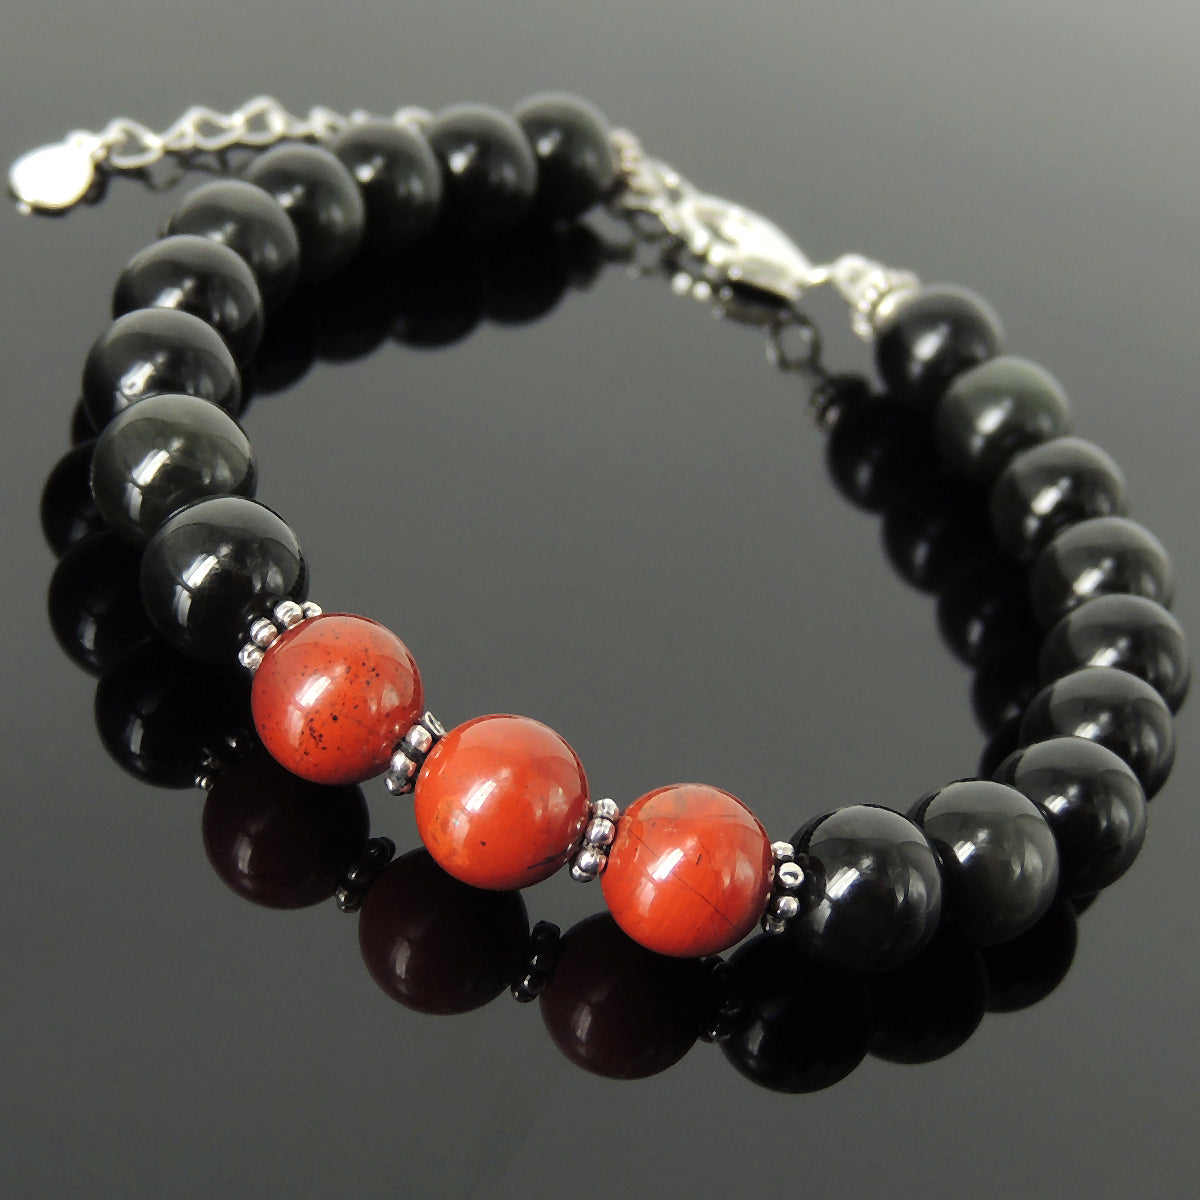 8mm Red Jasper & Rainbow Black Obsidian Healing Stone Bracelet with S925 Sterling Silver Flower Spacer Beads, Chain, & Clasp - Handmade by Gem & Silver BR1360